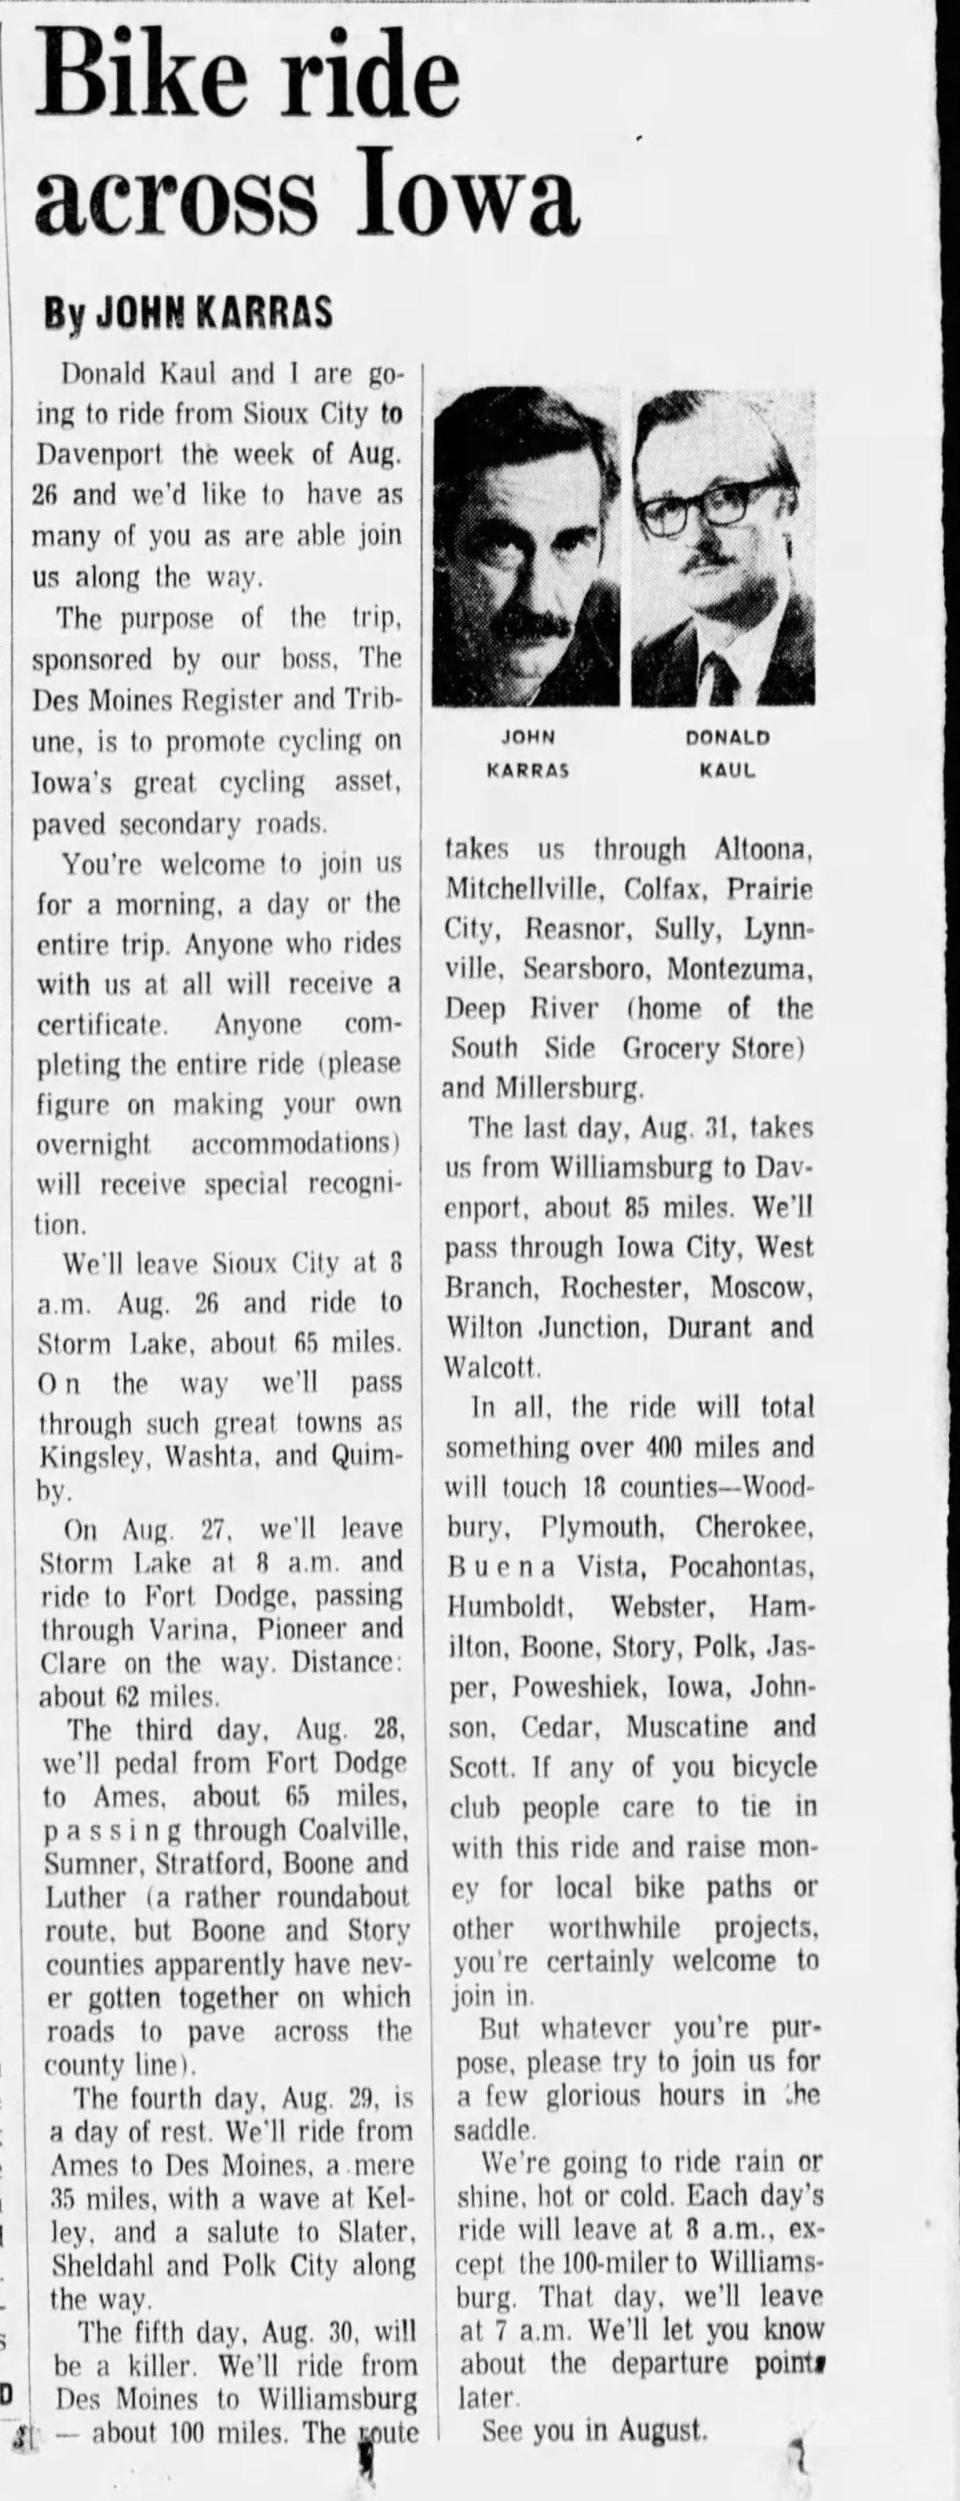 RAGBRAI Co-Founder John Karras wrote a 1973 column that invited readers along for the Great Six-Day Bike Trip Karras planned with columnist Donald Kaul. In 1975 the ride was renamed the Register's Annual Great Bicycle Ride Across Iowa.